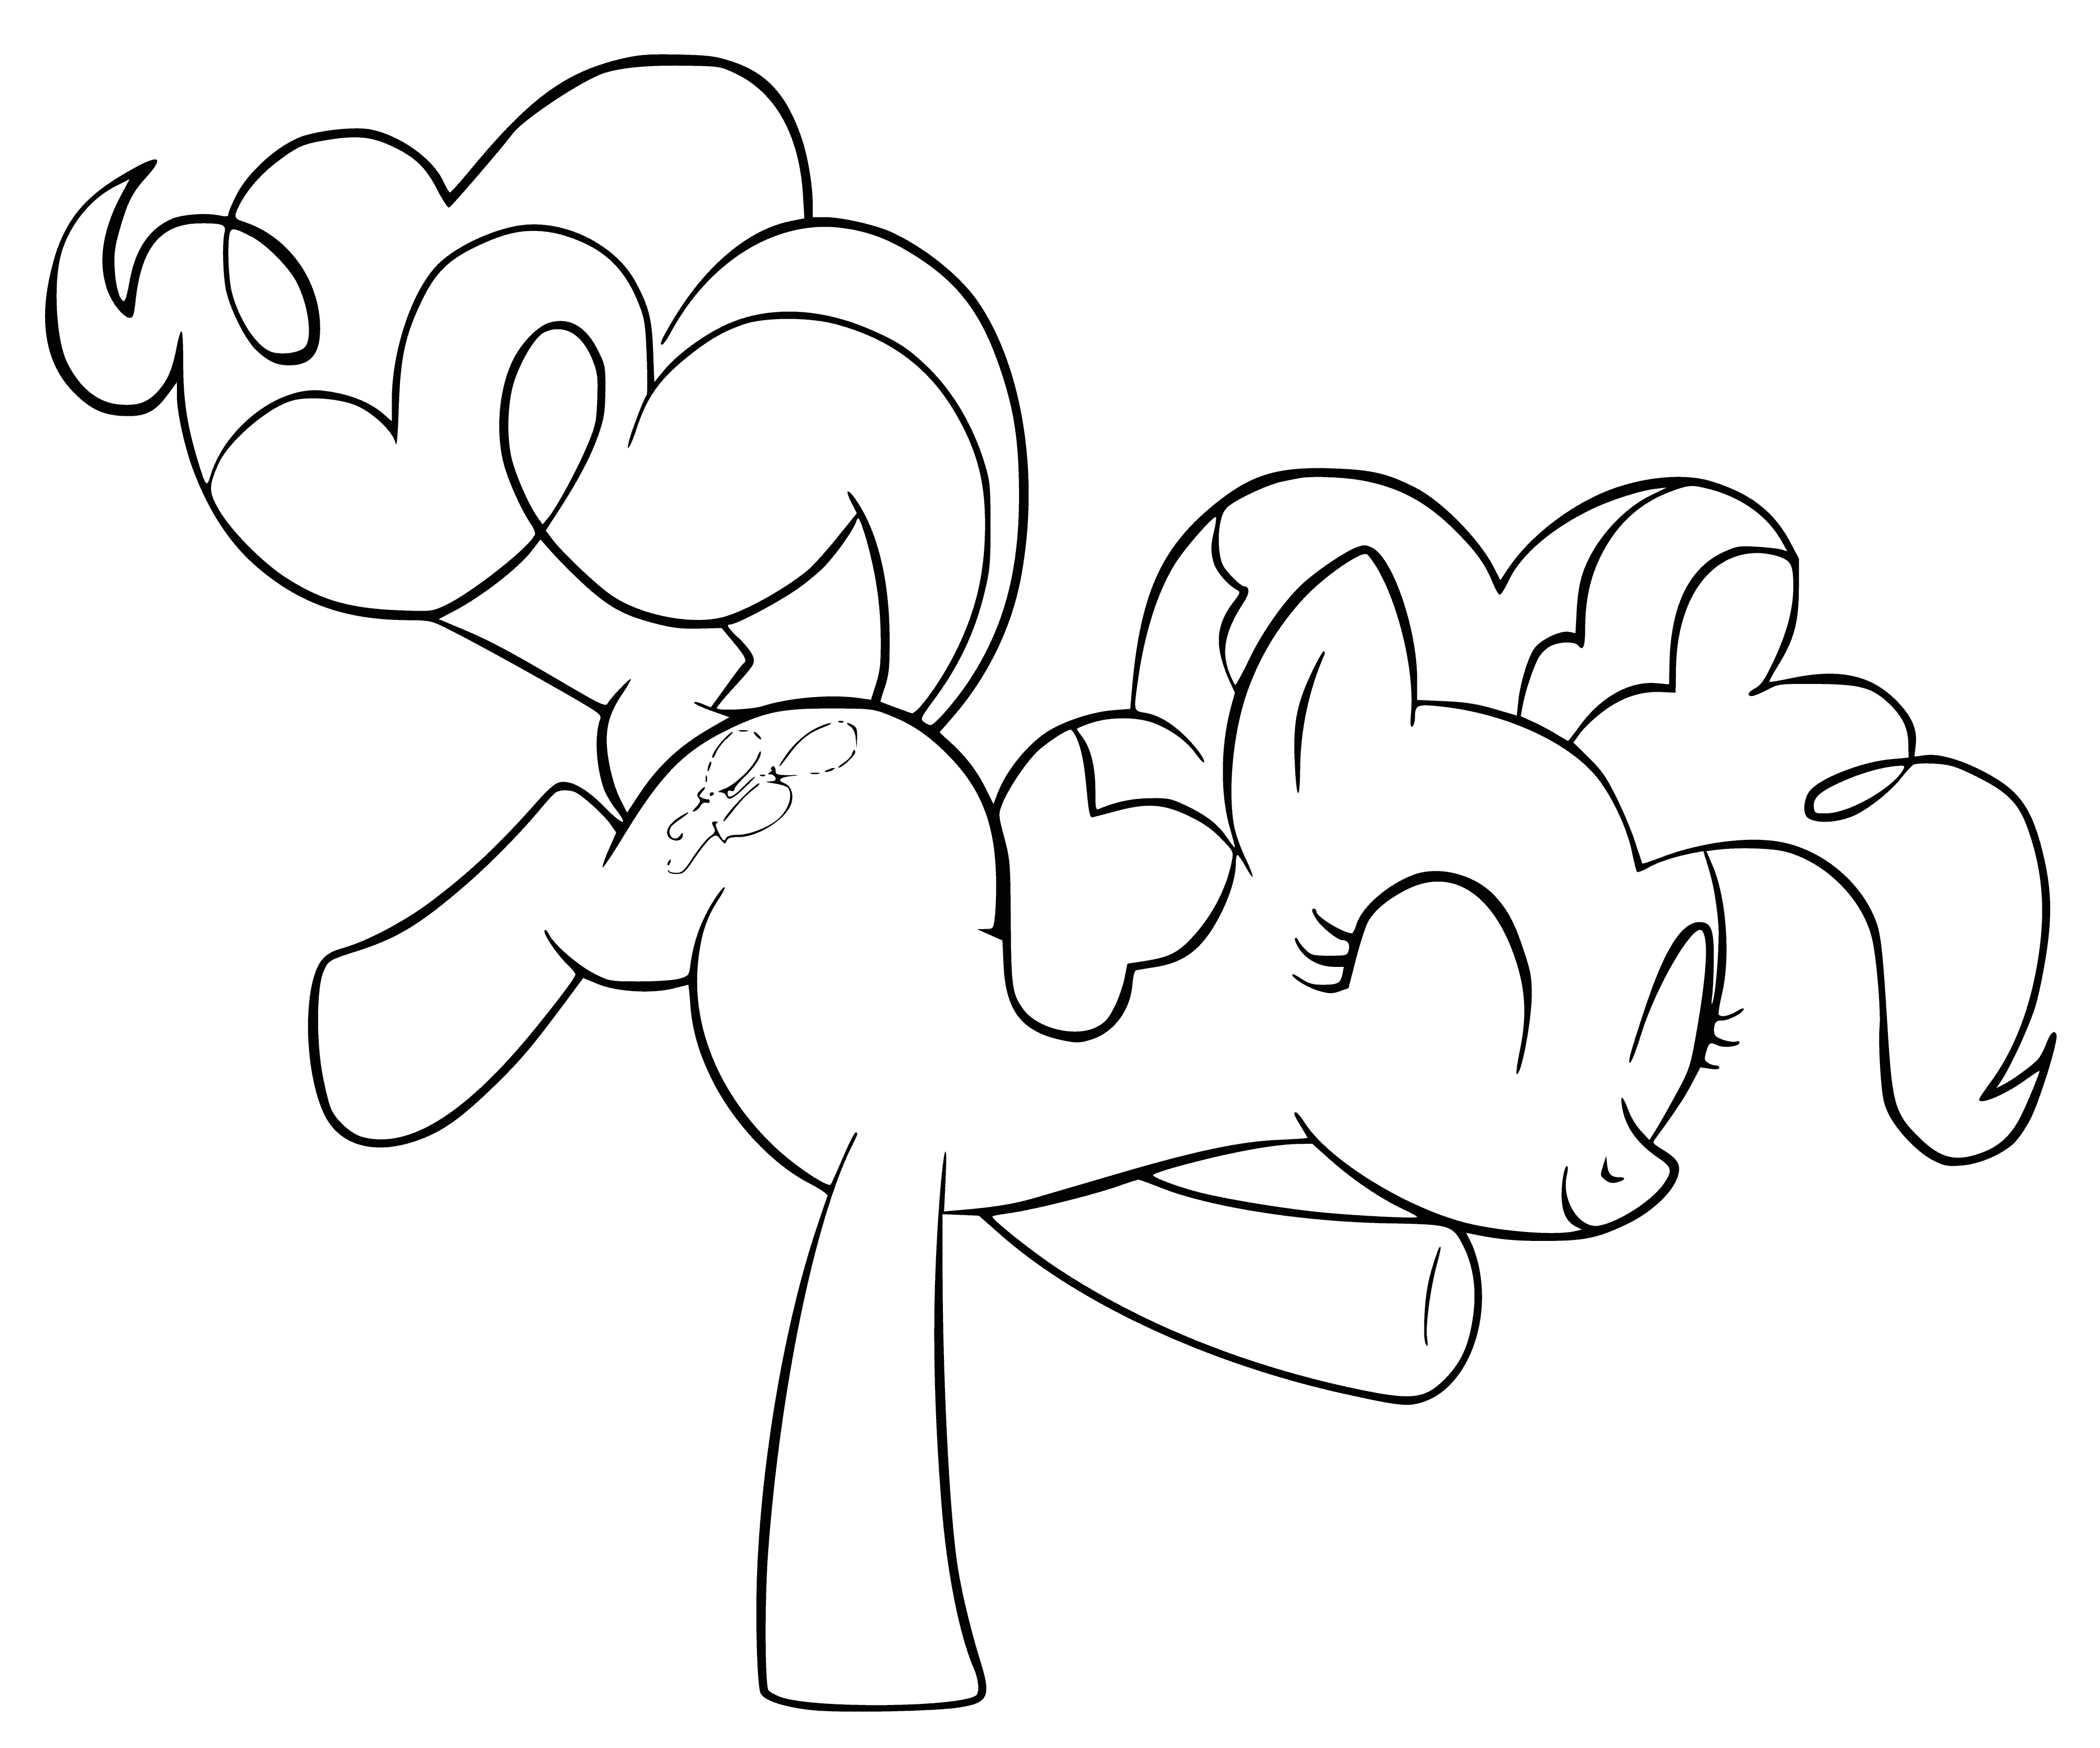 Pinky Pie coquine coloriage